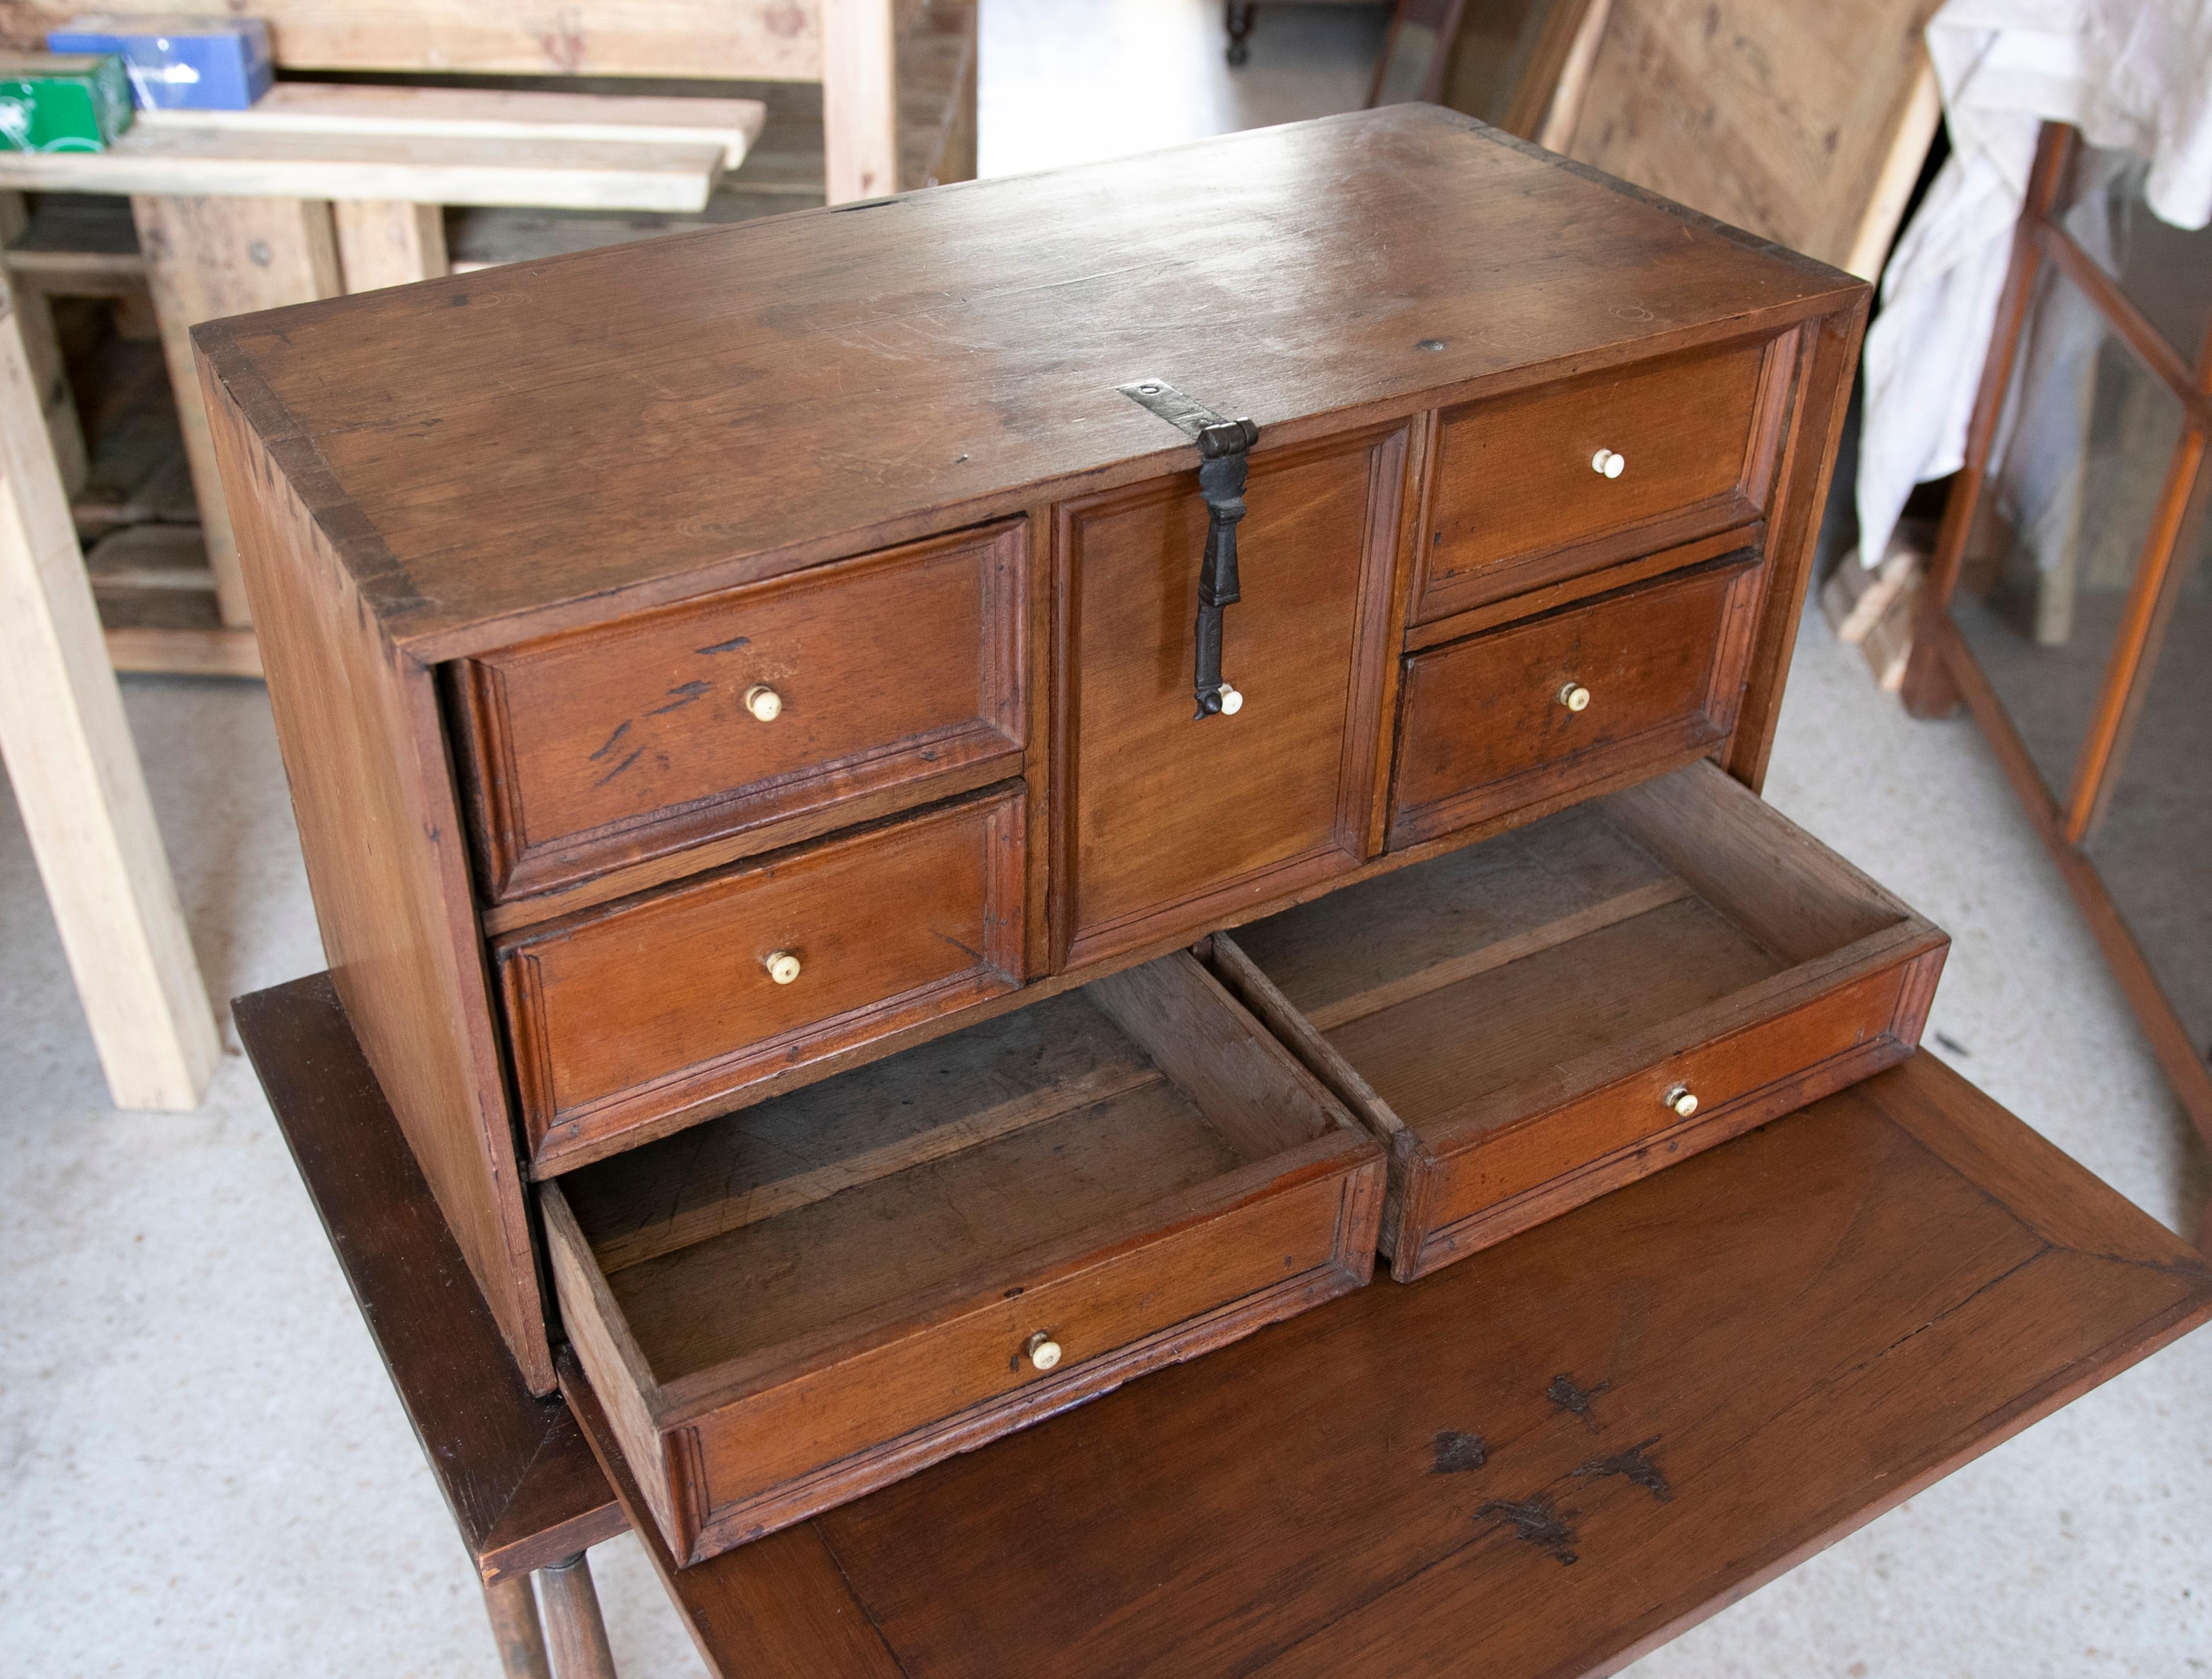 19th Century Spanish Wooden Cabinet with Original Foot, Door and Drawers For Sale 11